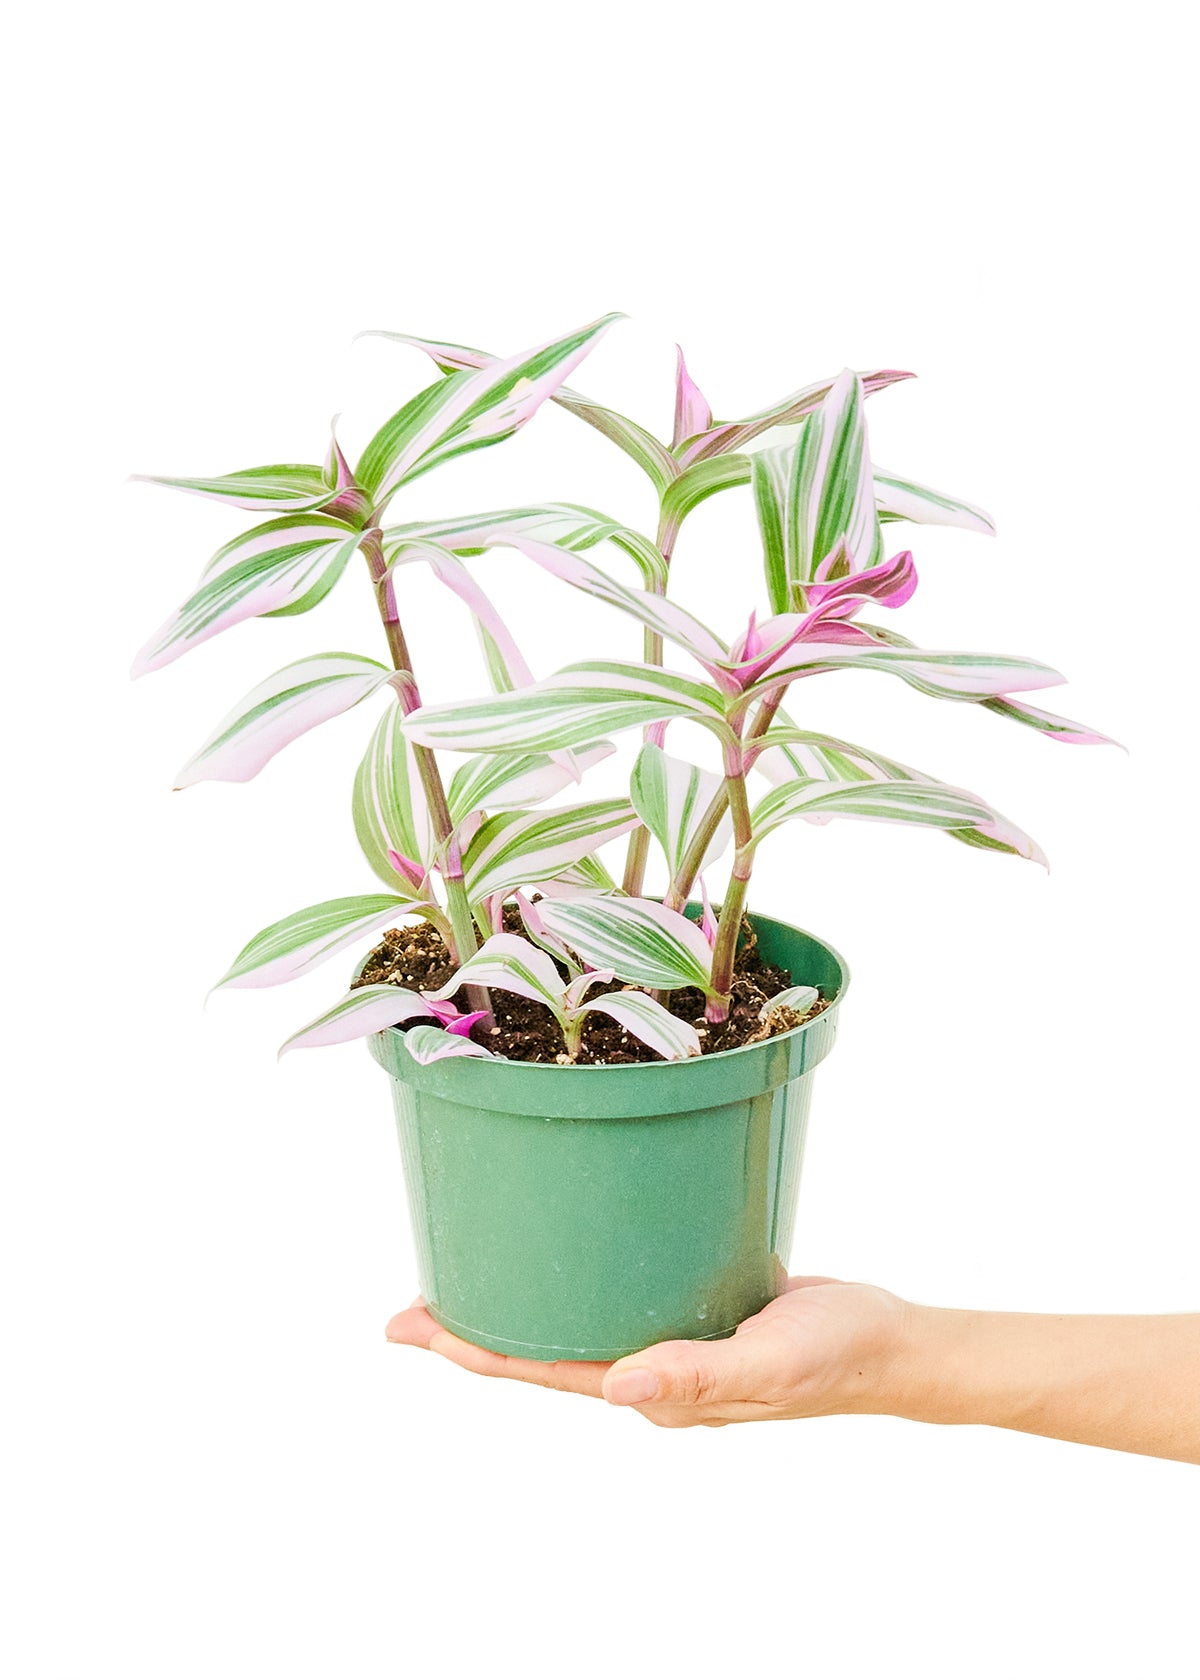 Medium size Nanouk Tradescantia Plant in a growers pot with a white background with a hand holding the bottom of the pot at a slight angle showing the top